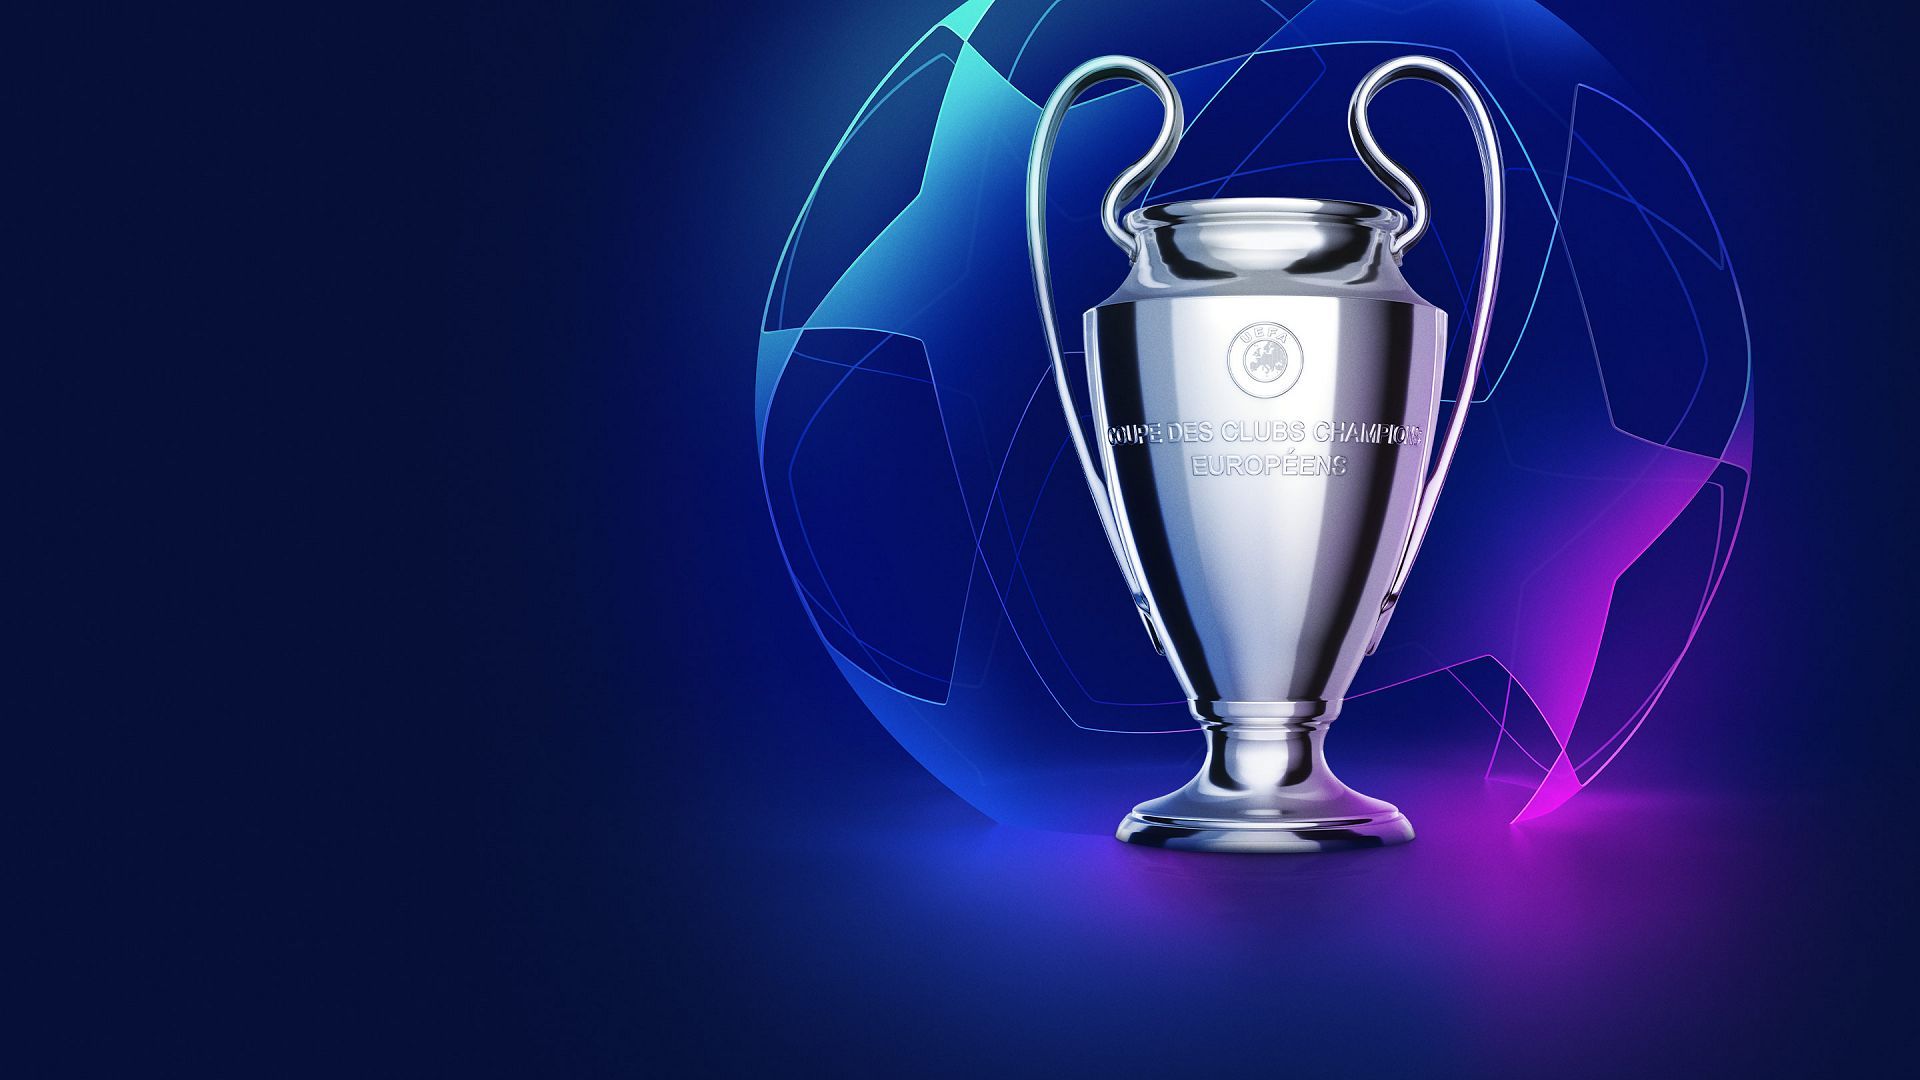 UCL 2021 Wallpapers Wallpaper Cave